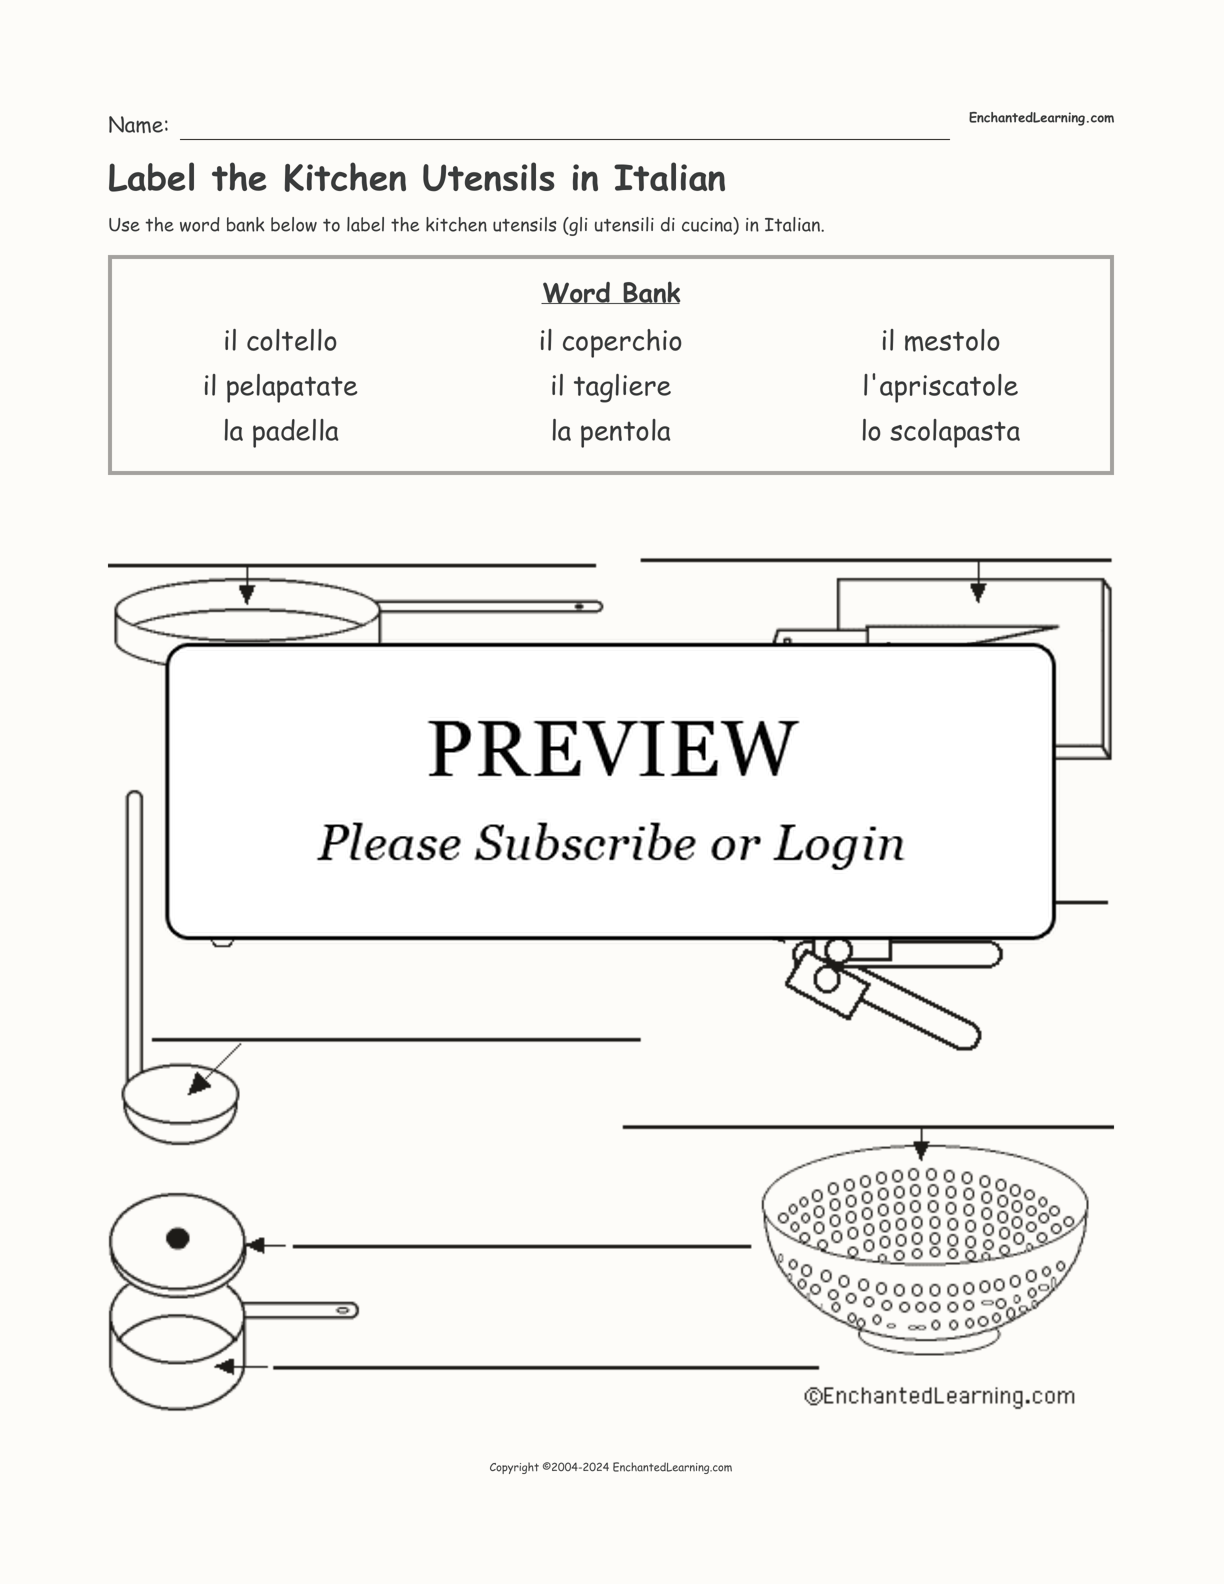 Label the Kitchen Utensils in Italian interactive worksheet page 1